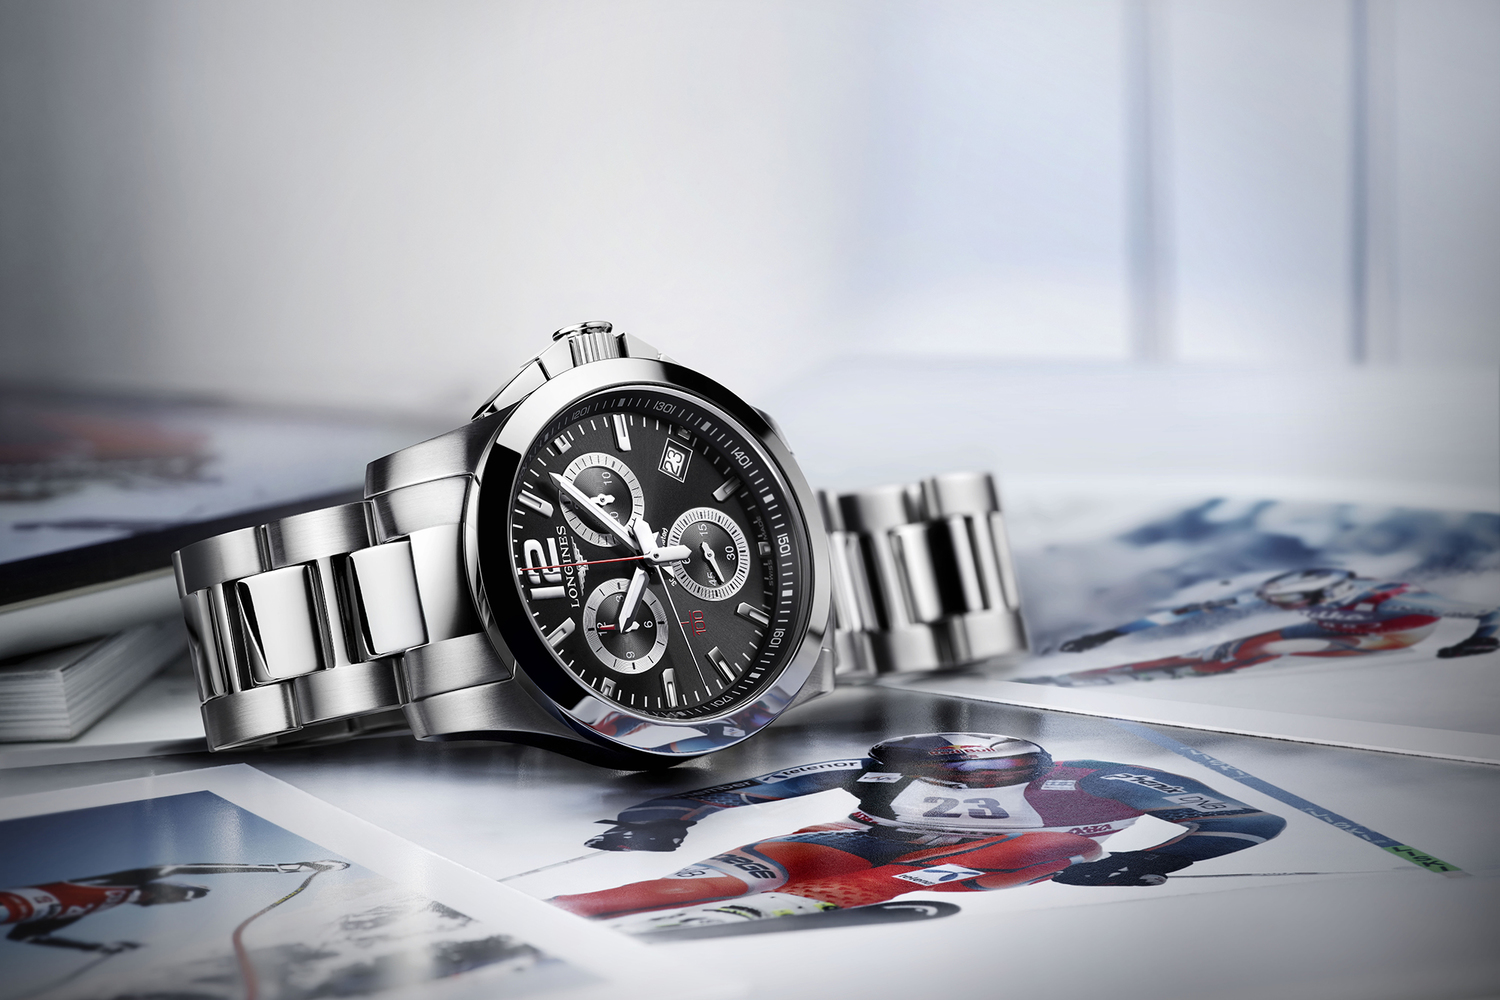 Introducing The Longines Conquest 1/100th Alpine Skiing 